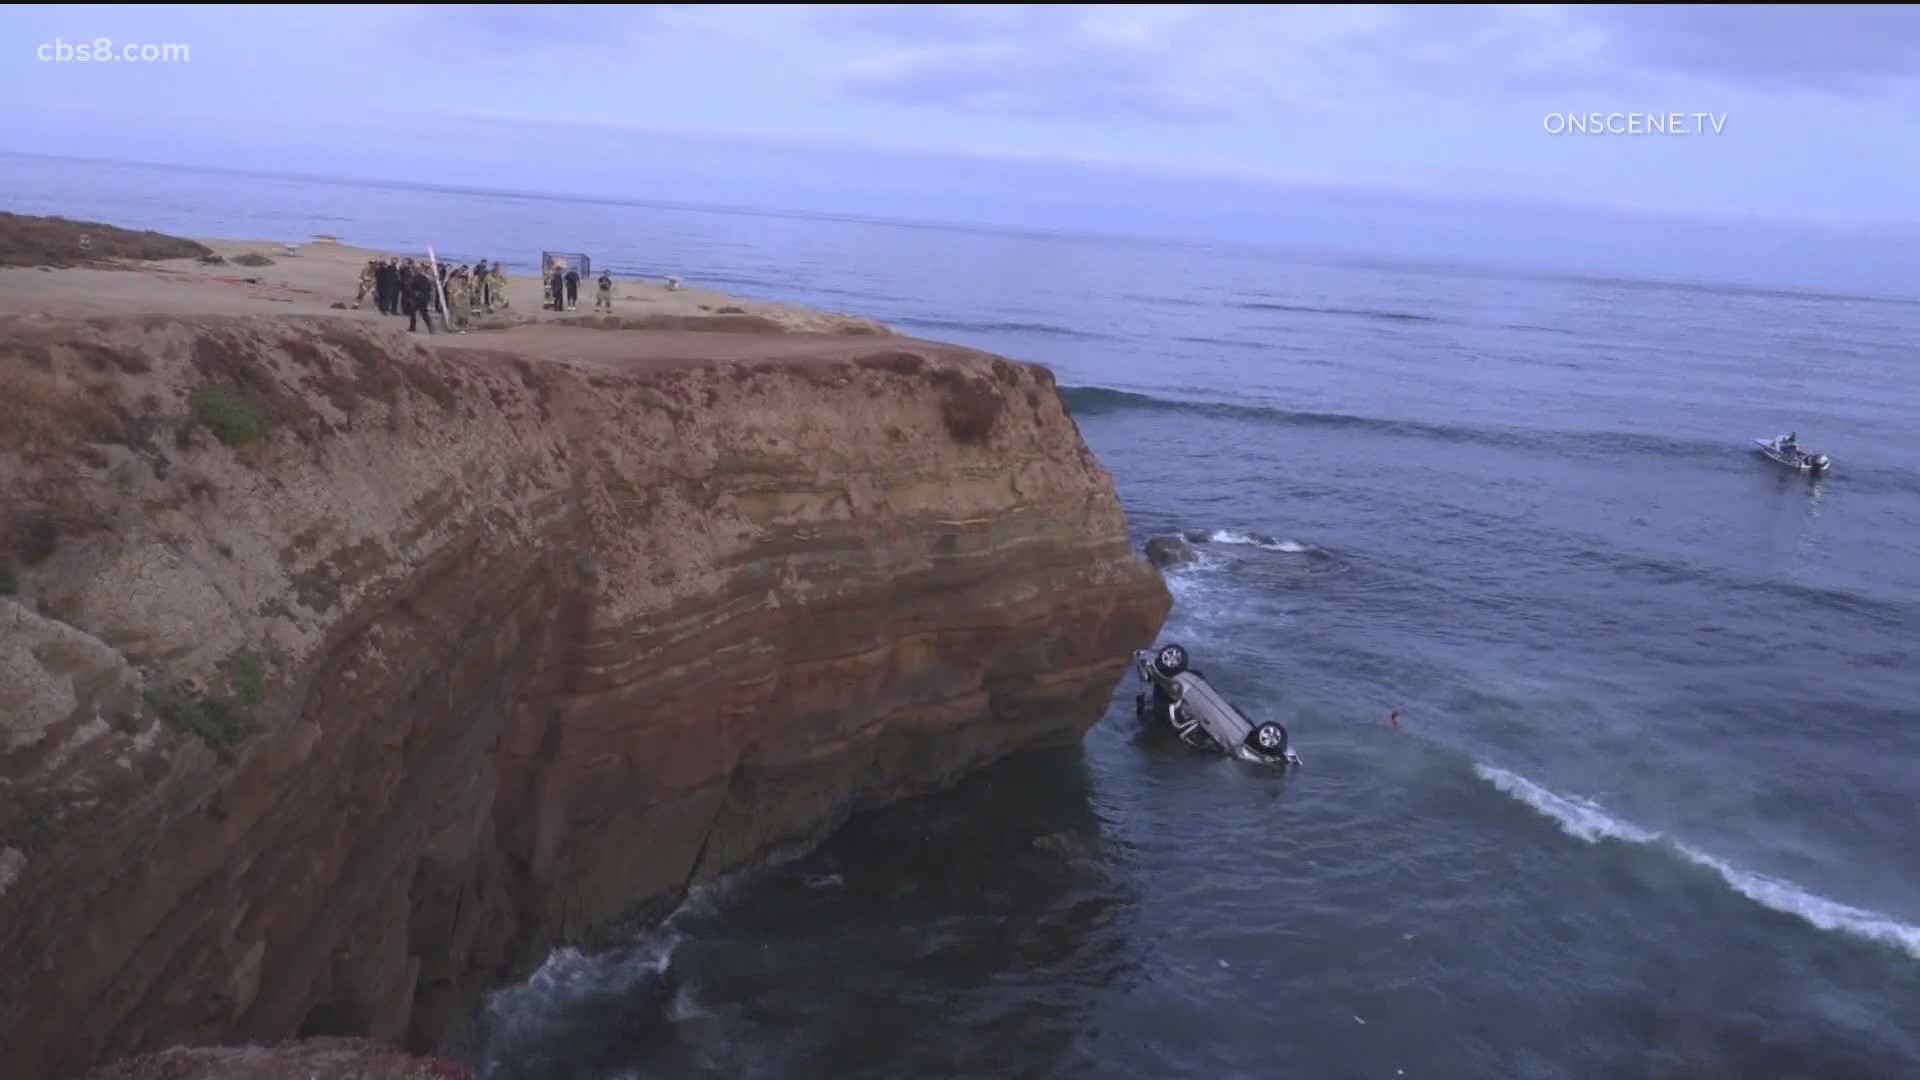 A reportedly suicidal father and his two 3-year-old daughters were rescued Saturday after the man's truck hit the bottom of Sunset Cliffs in Point Loma, police said.